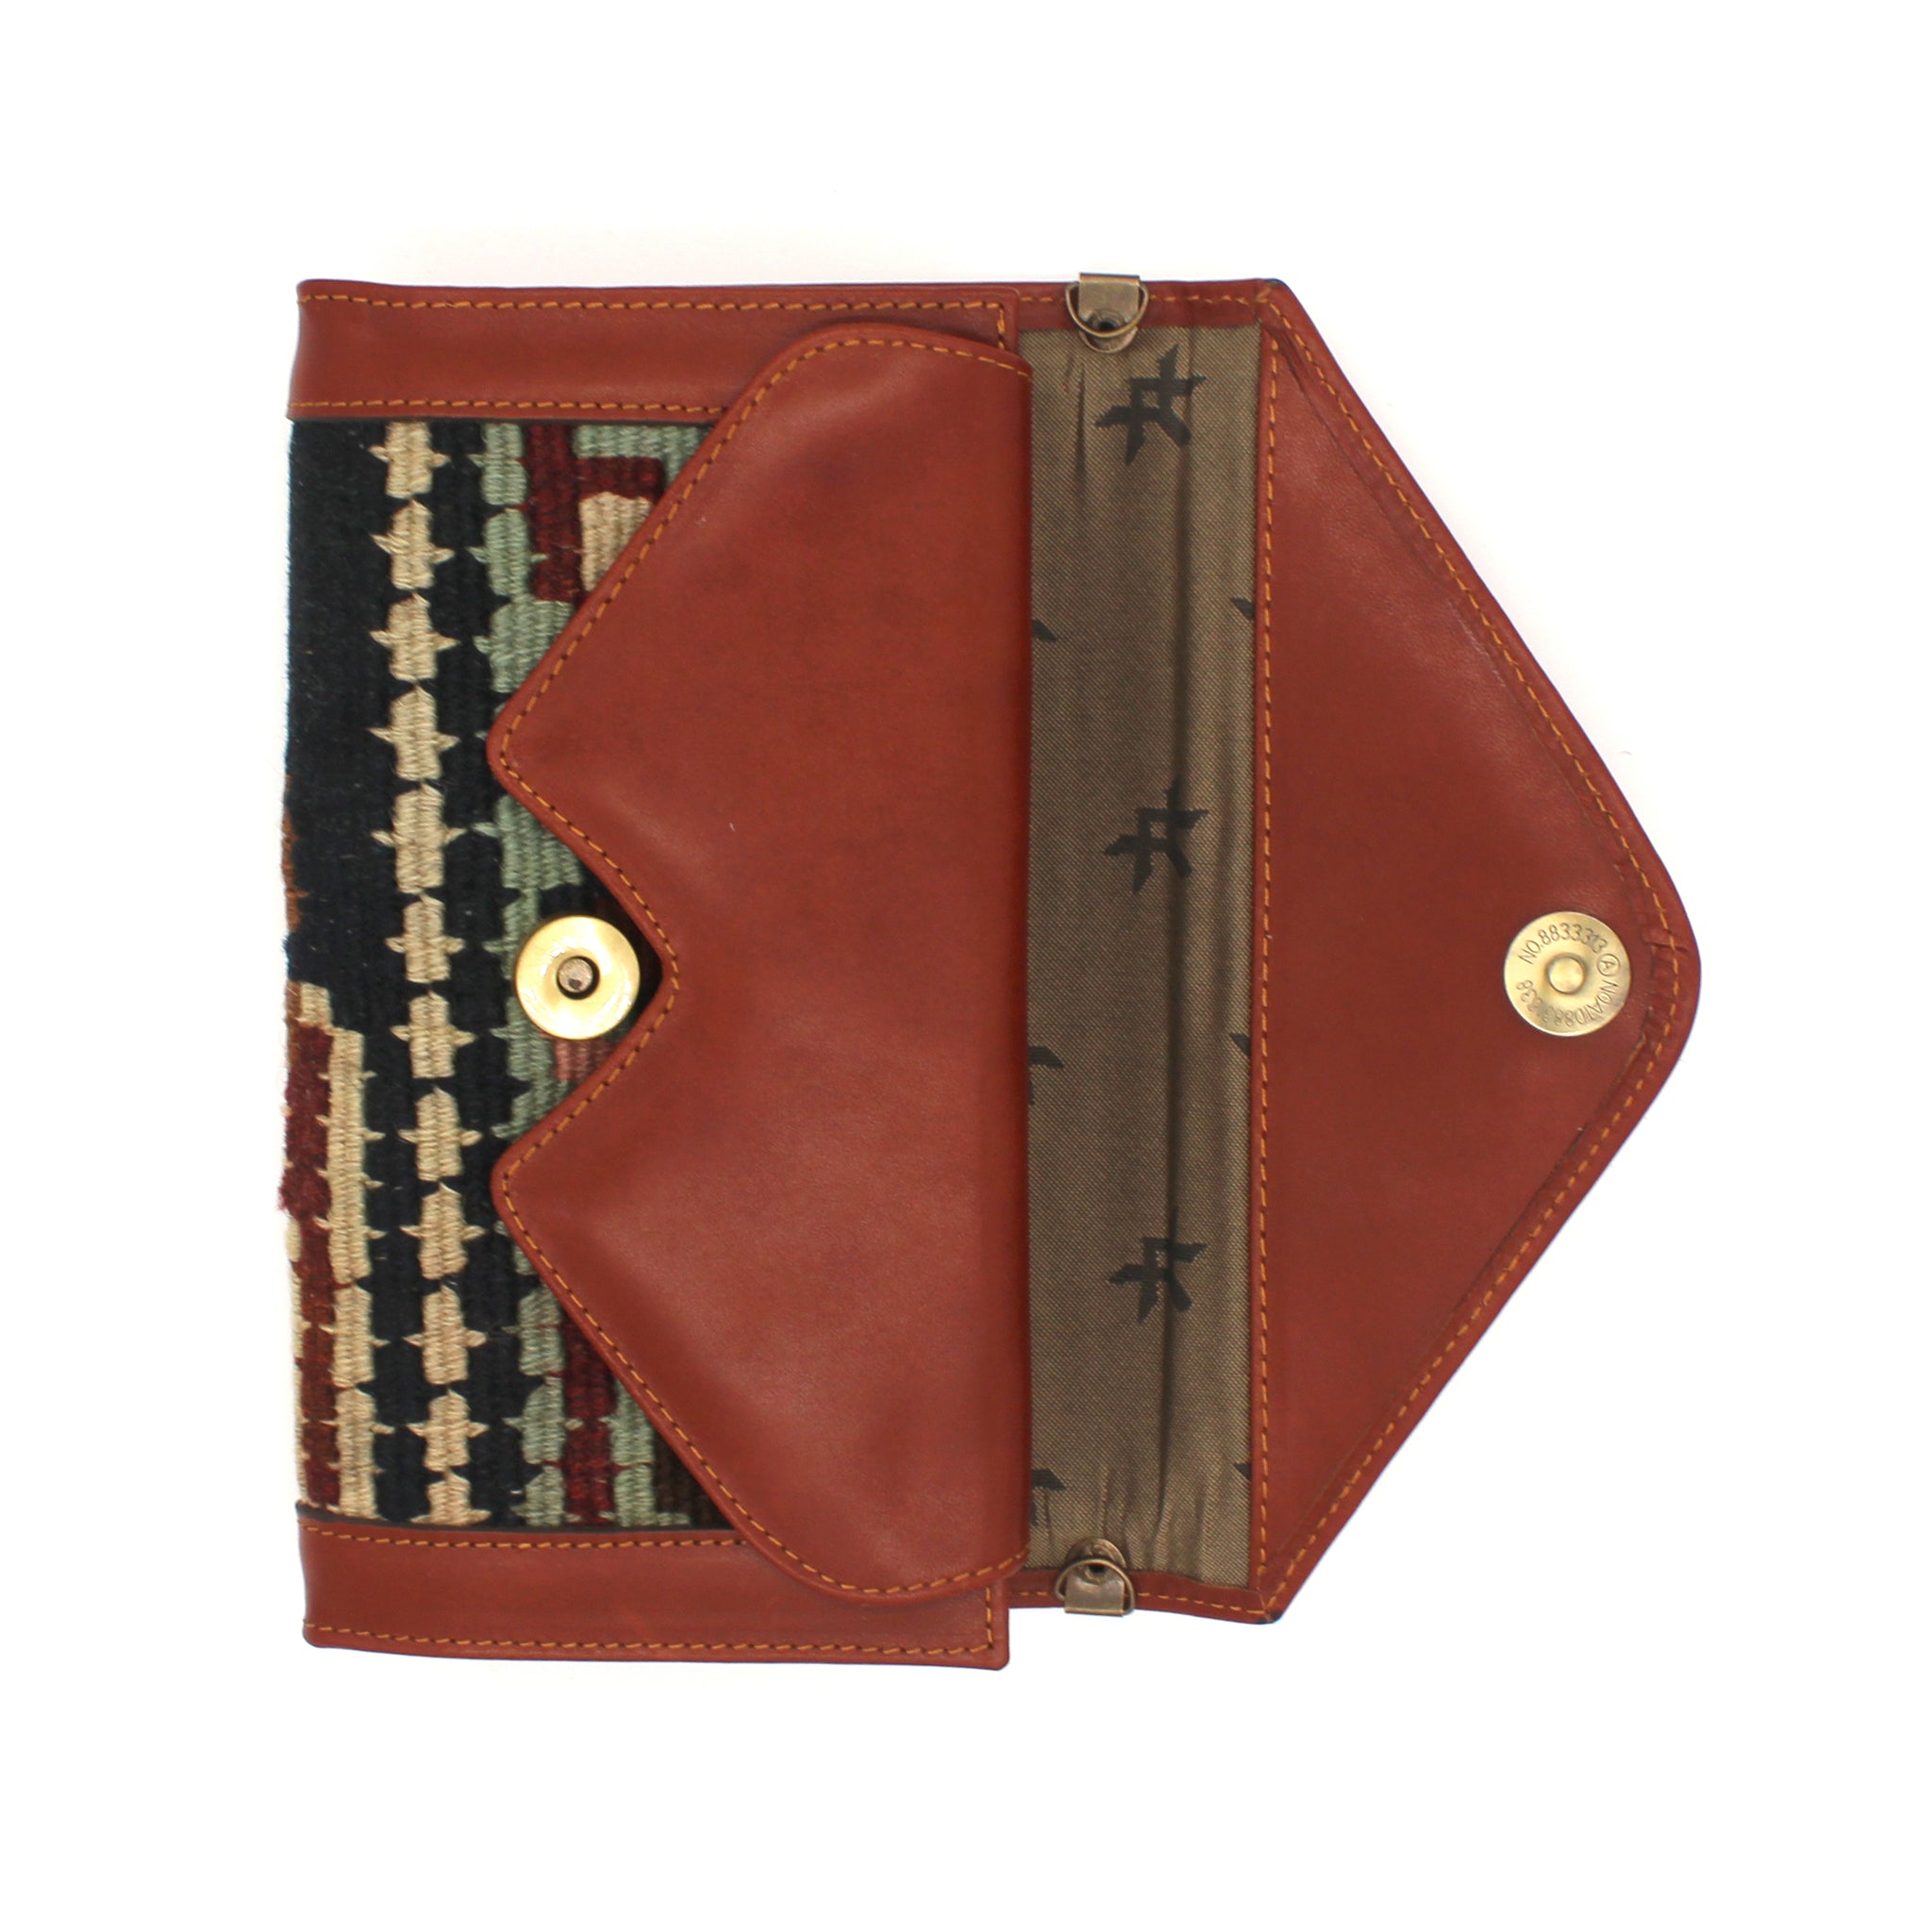 Vintage Rug and Leather Wallet with Strap No. 3